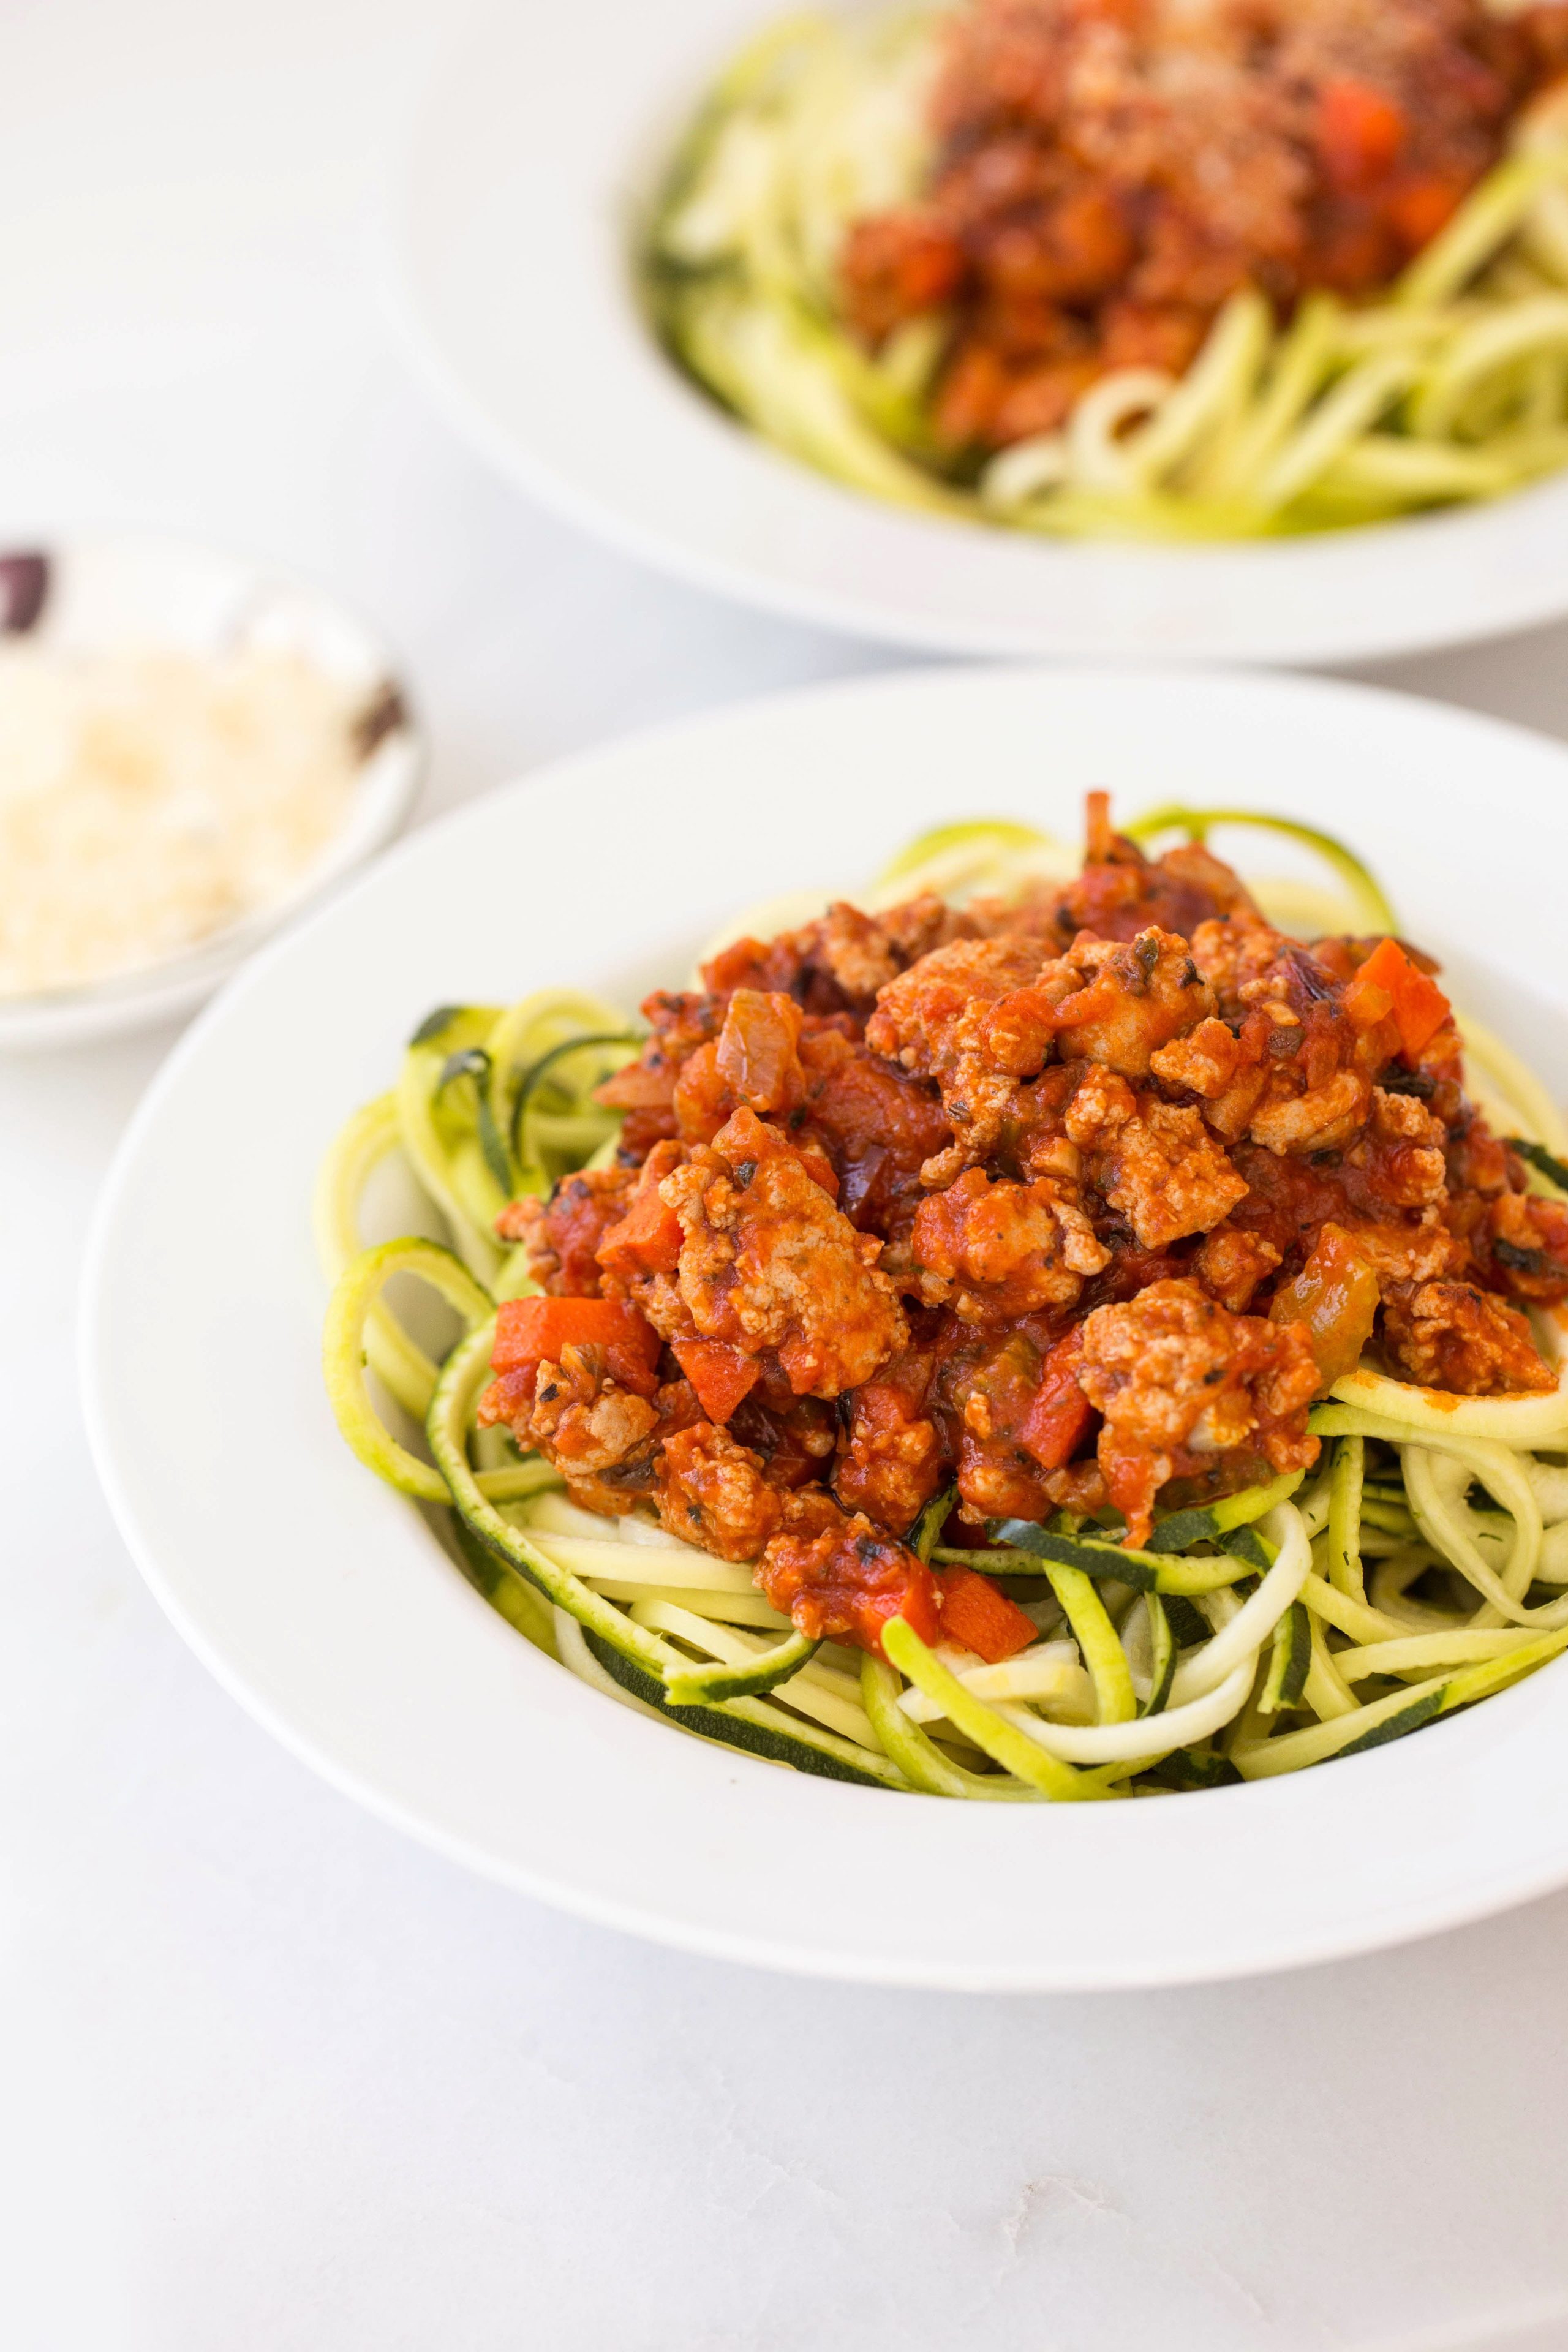 Turkey Bolognese with Zucchini Noodles from inspiralized.com on foodiecrush.com